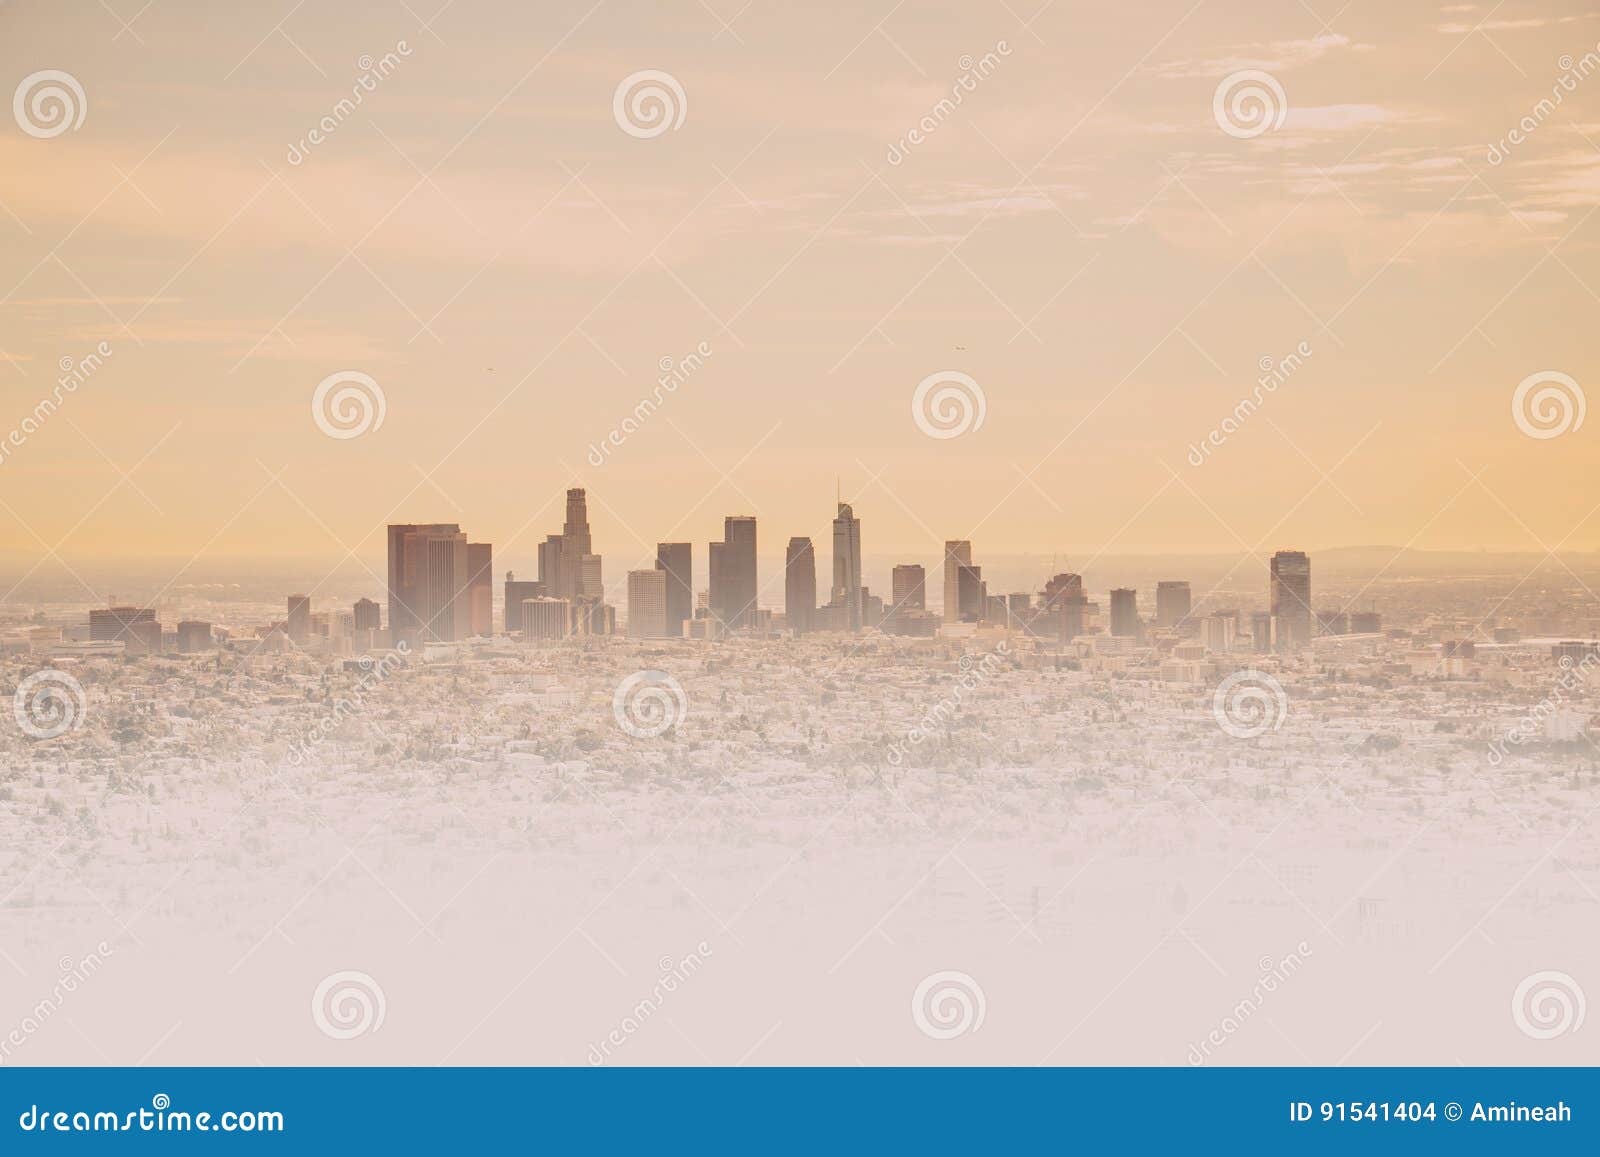 los angeles skyline with its skyscrappers from the hollywood hills, california, usa